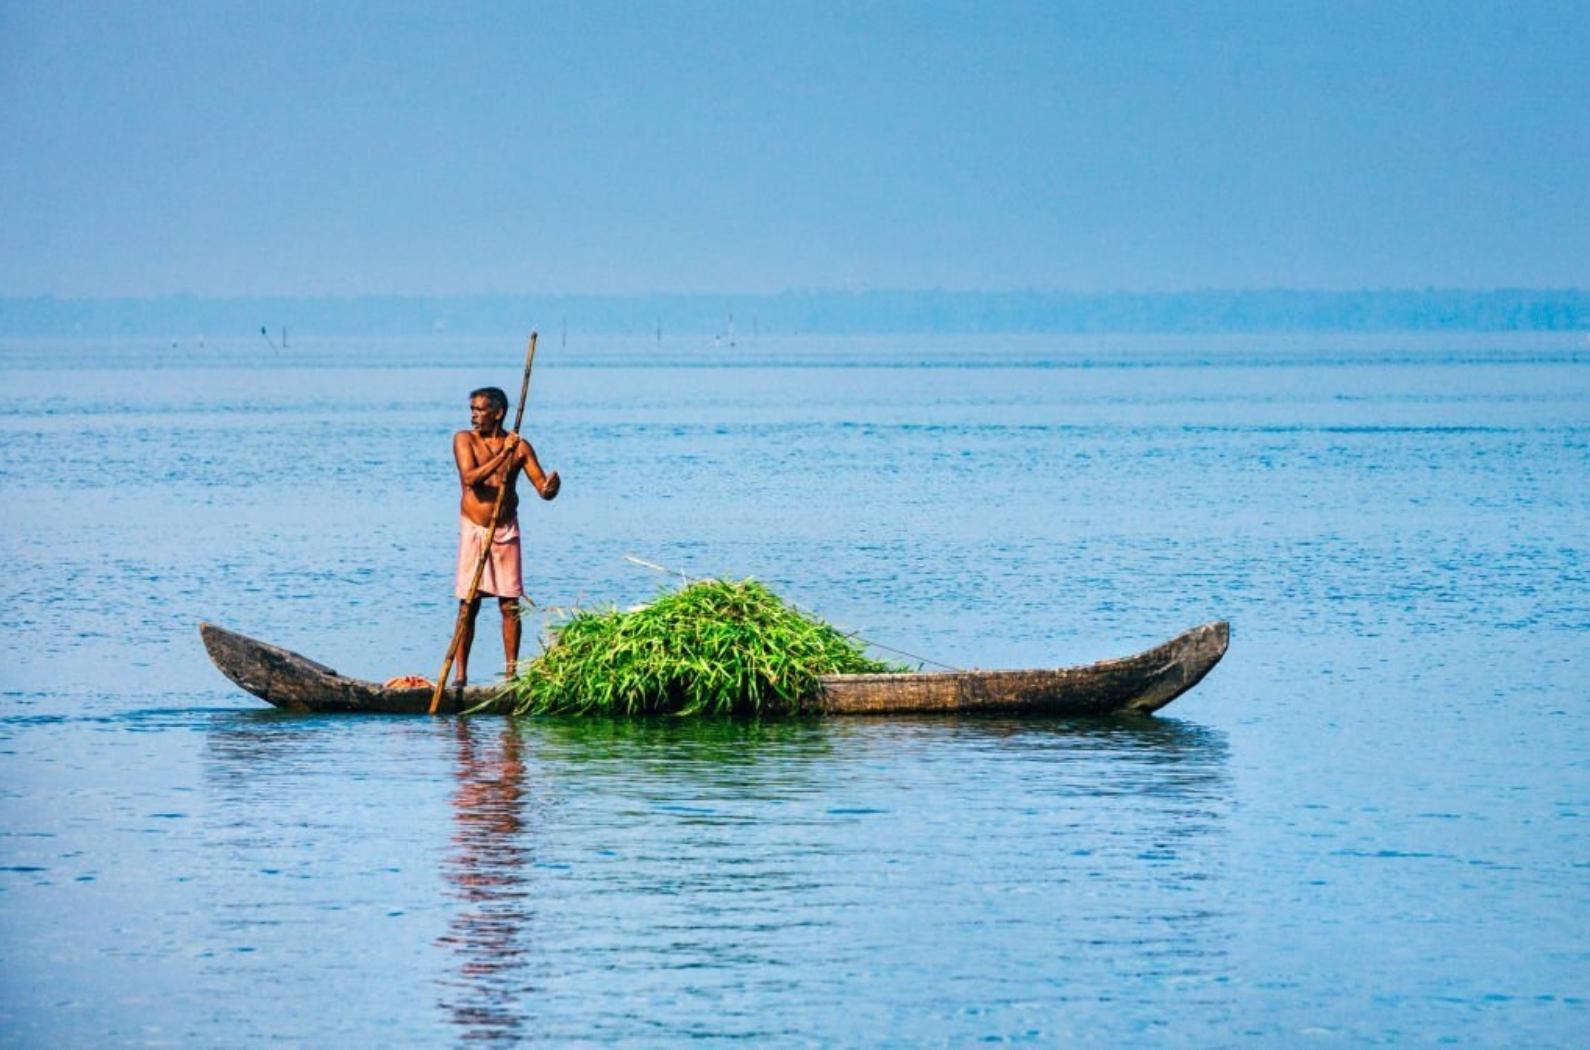 Indian man transporting his crop by Kettuvallam (a traditional Indian boat) on Vembanad Lake in Kumarakom.